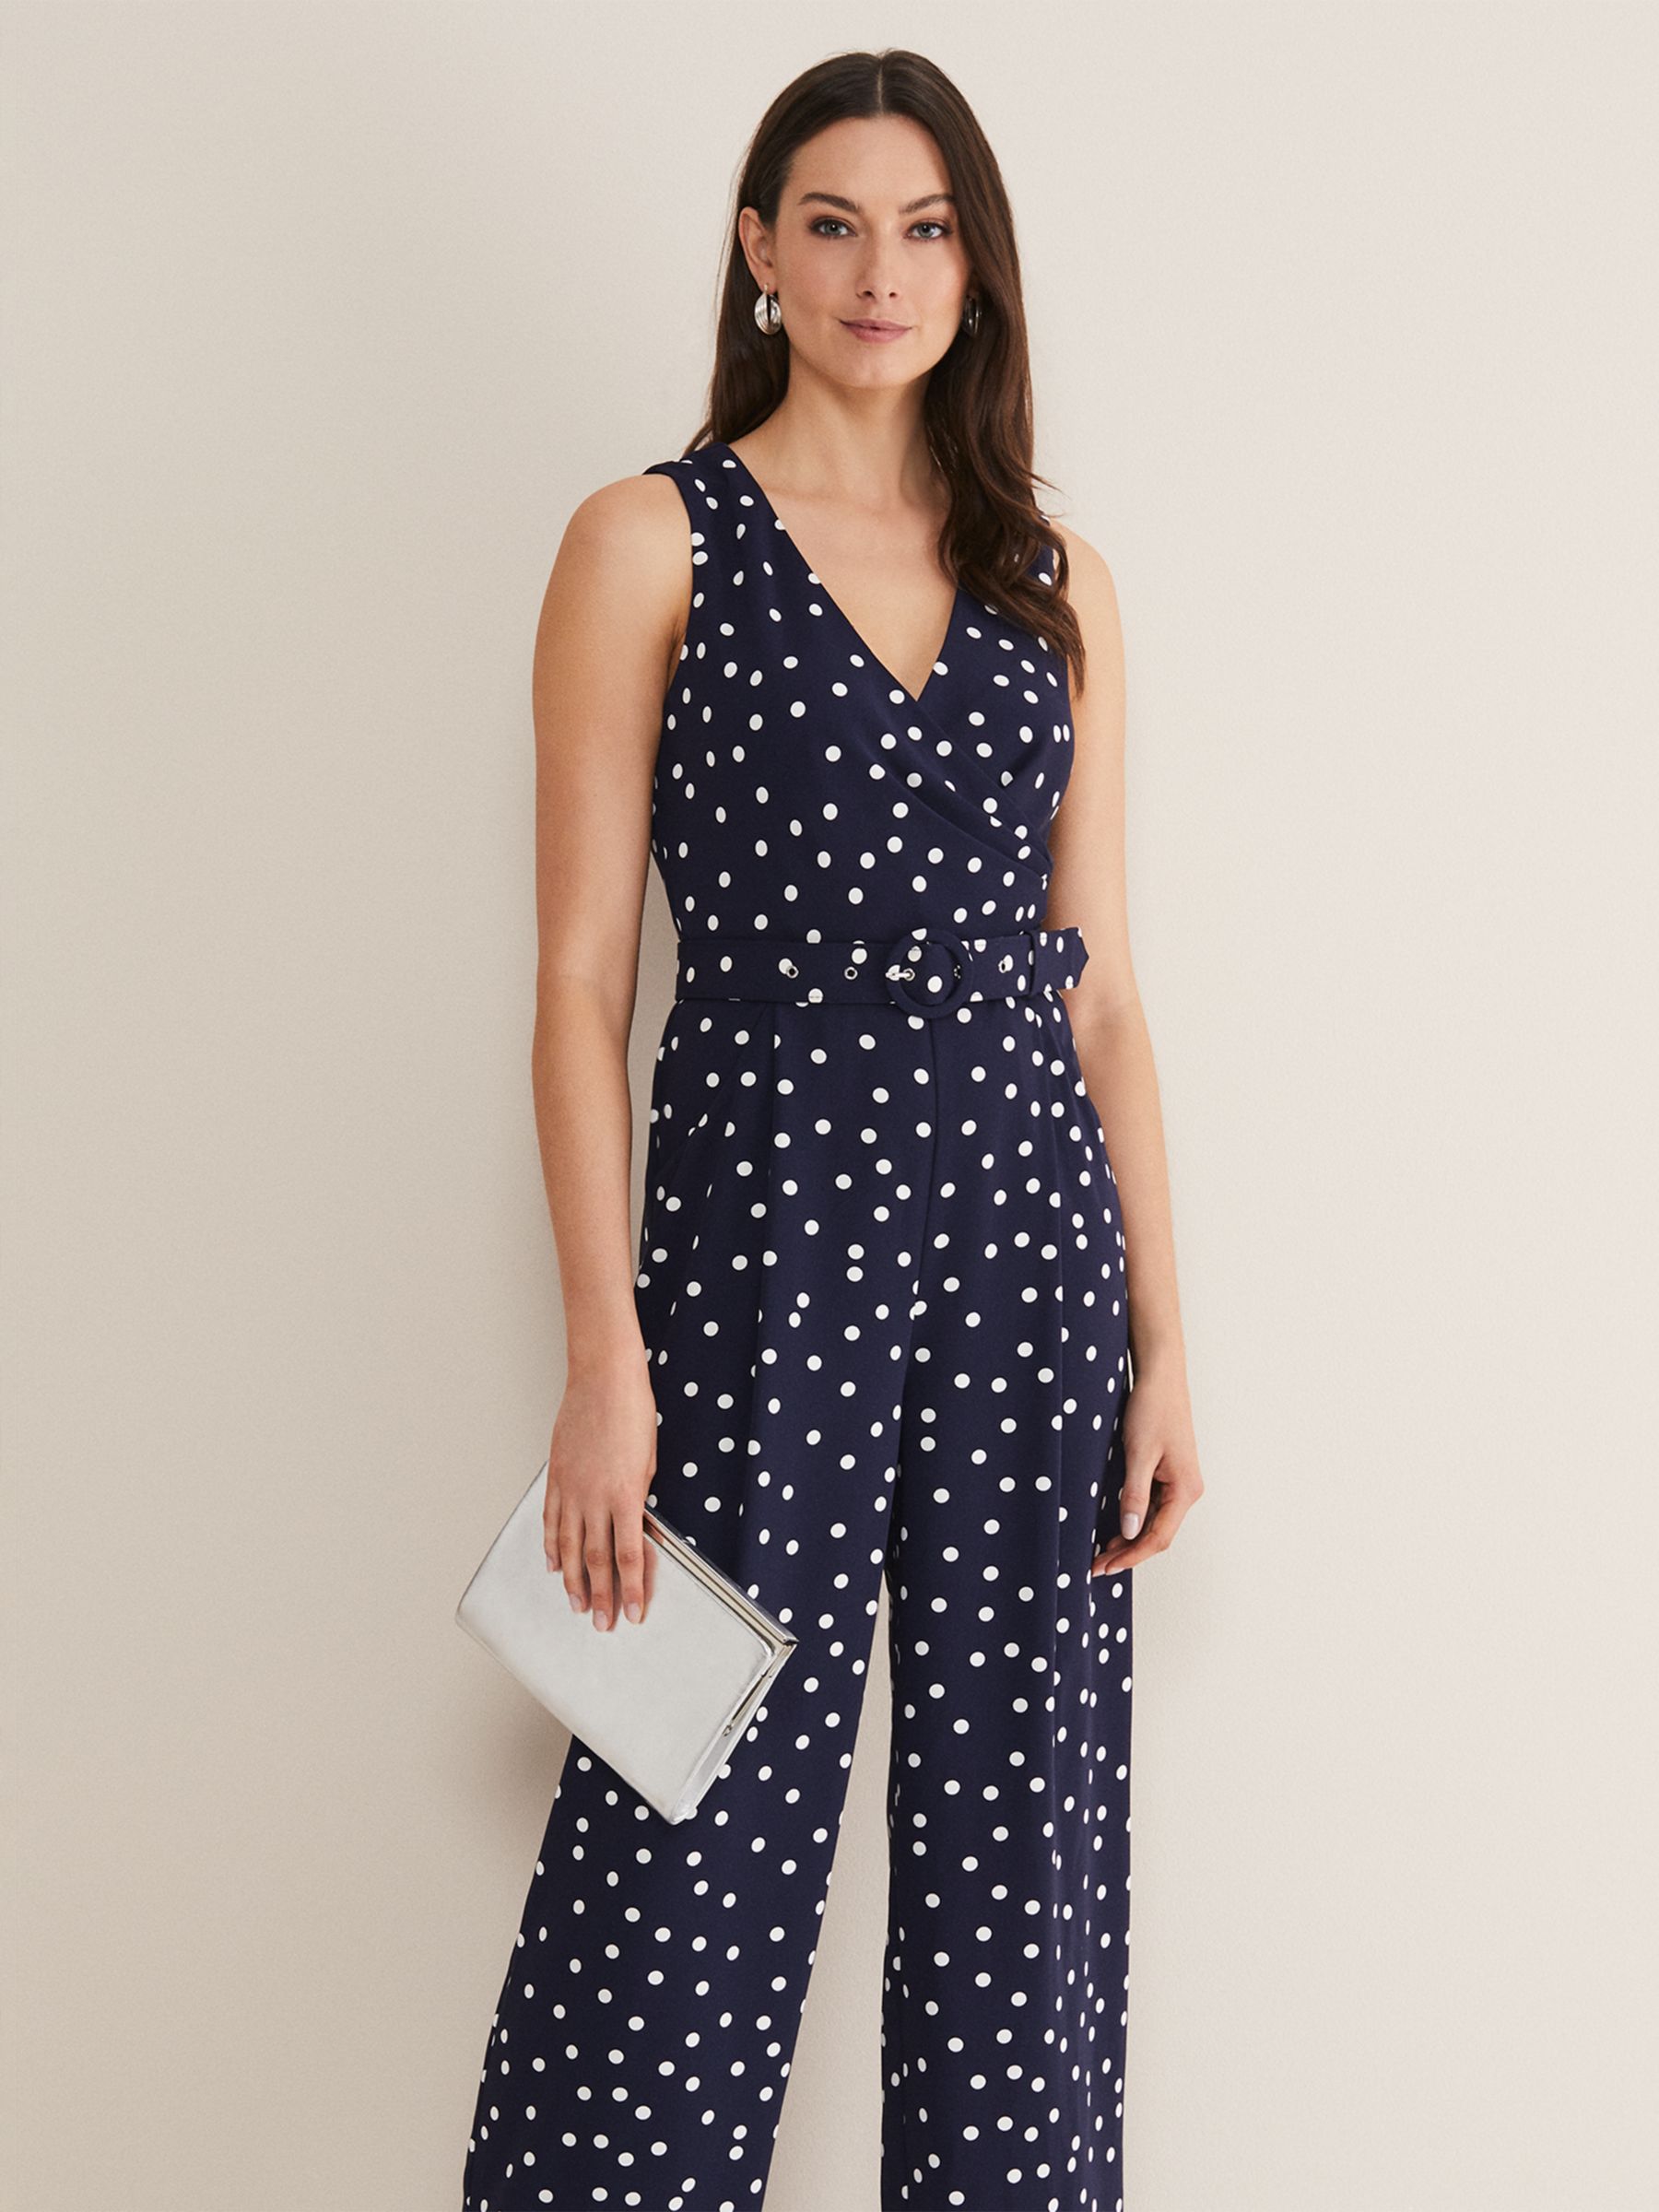 Phase Eight Kenzie Spot Jumpsuit, Navy/Ivory, 26